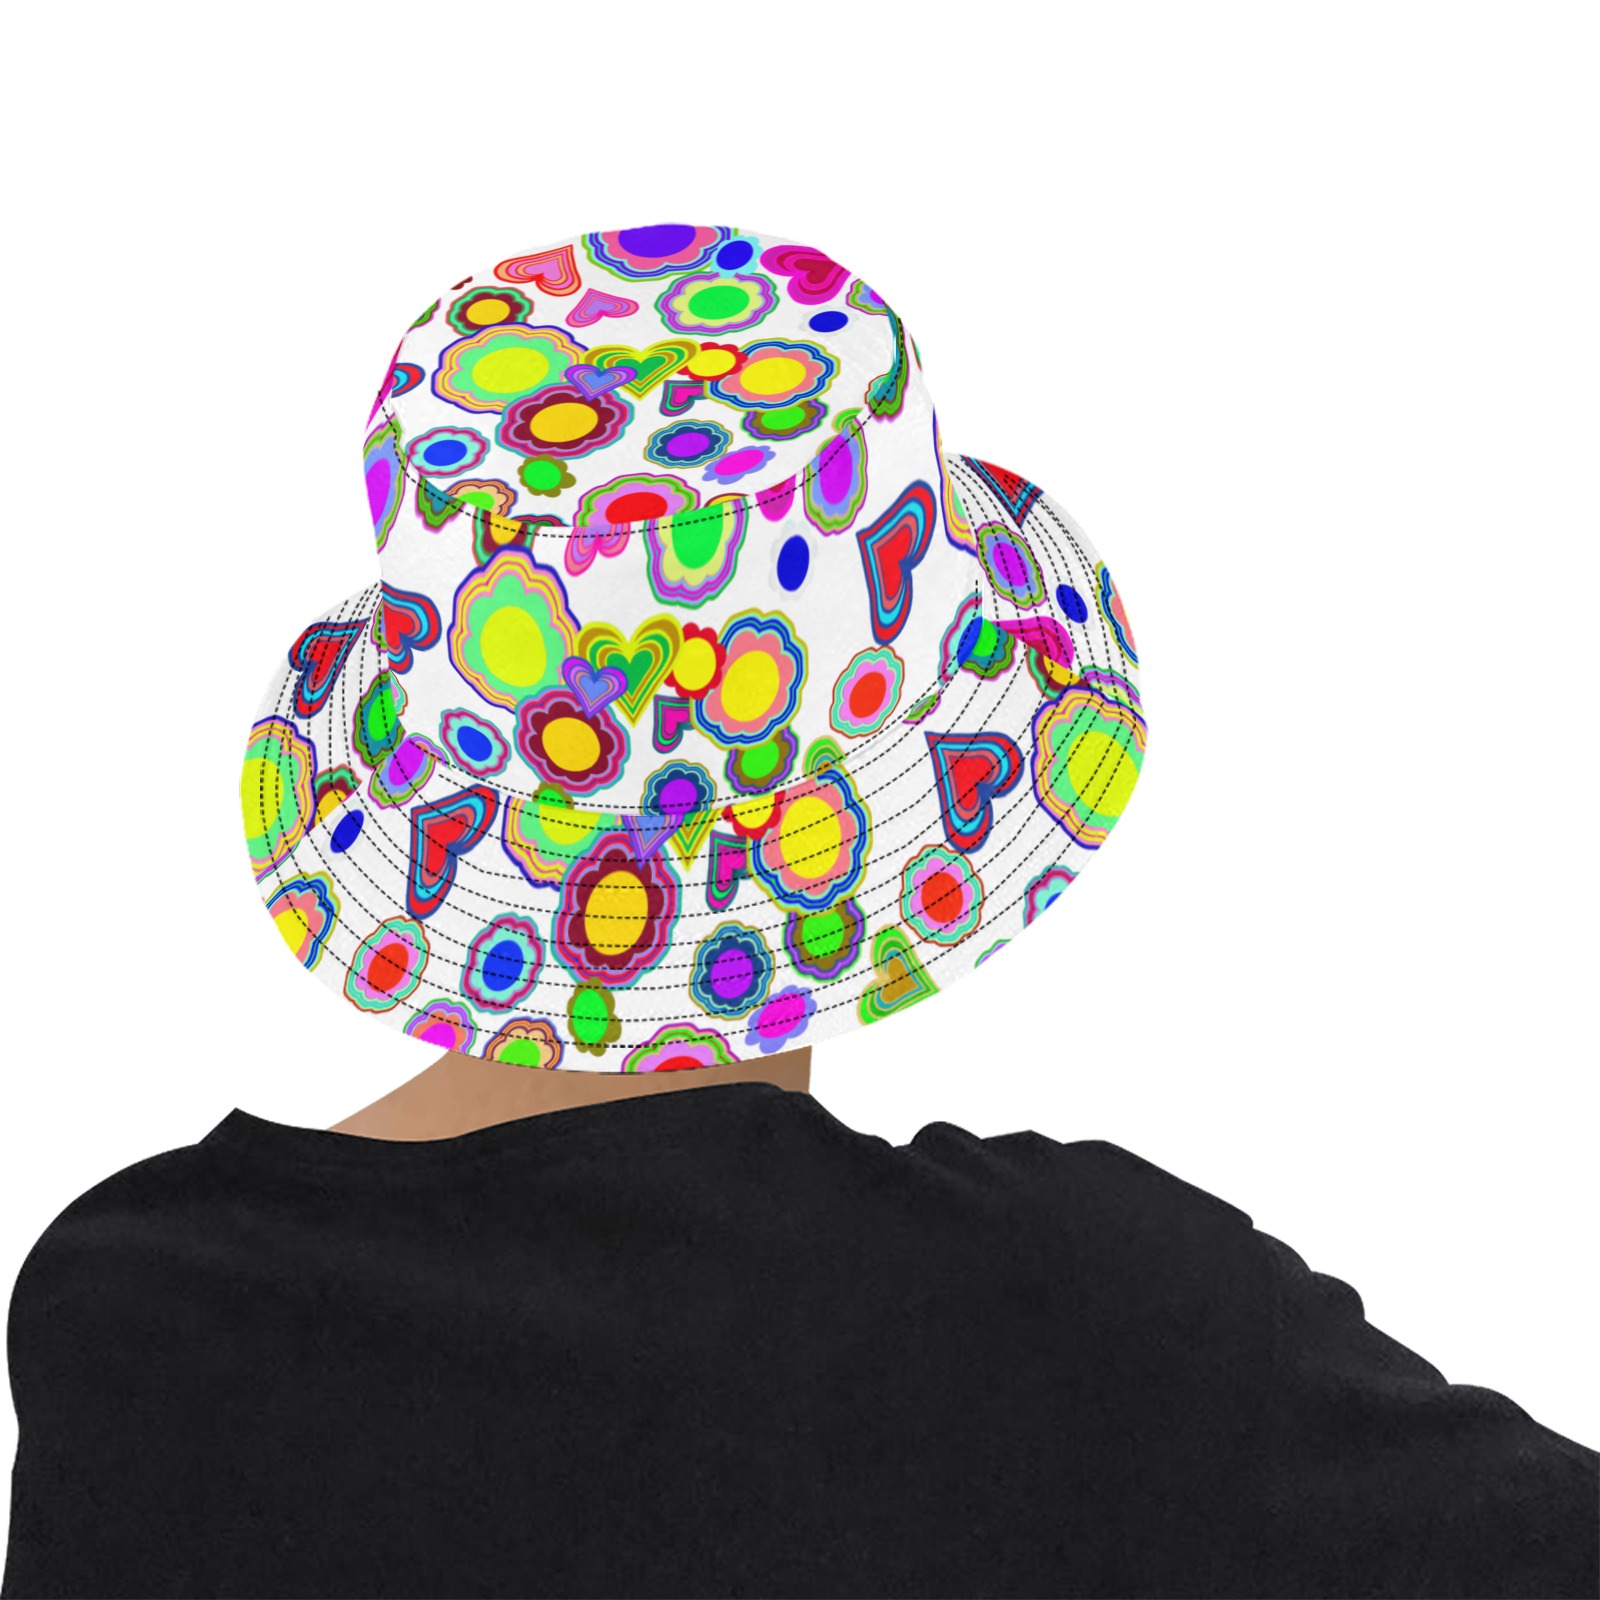 Groovy Hearts and Flowers White Unisex Summer Bucket Hat